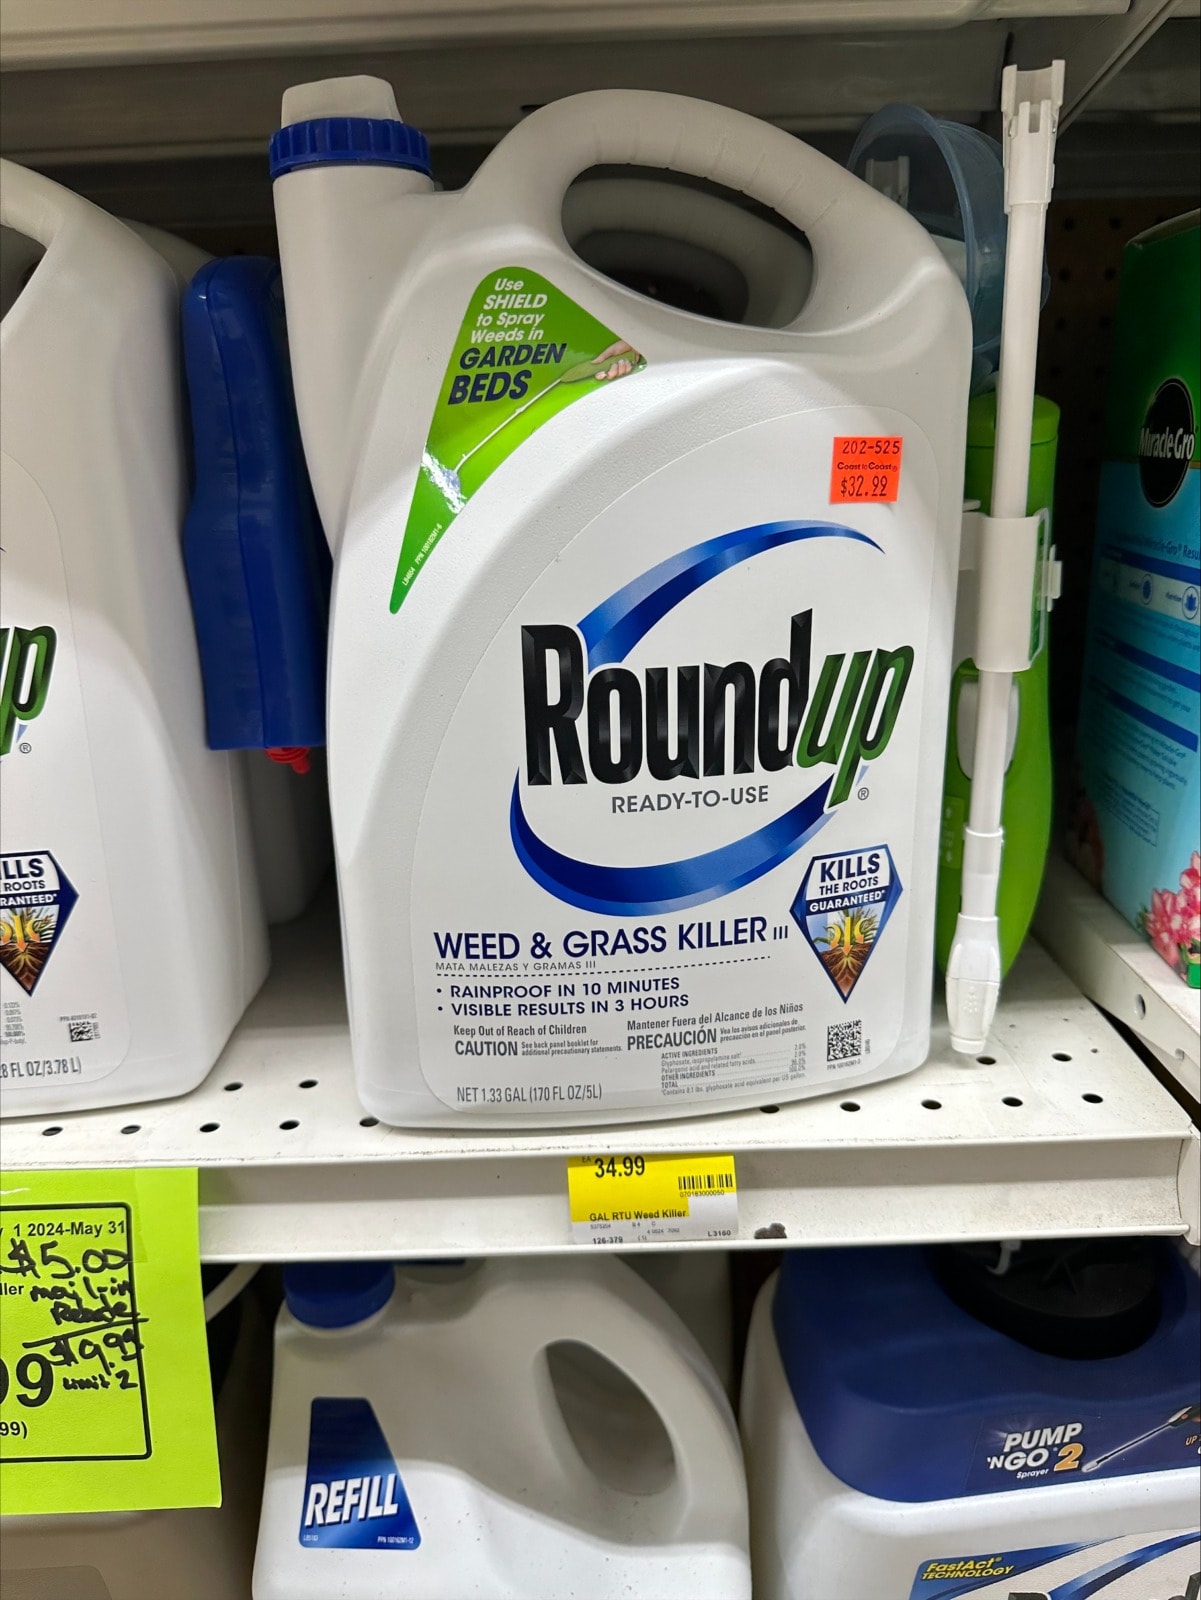 A white bottle blue accents sits on the shelf of a hardware store. the bottle reads "Roudup ready-to-use" "weed and grass killer"